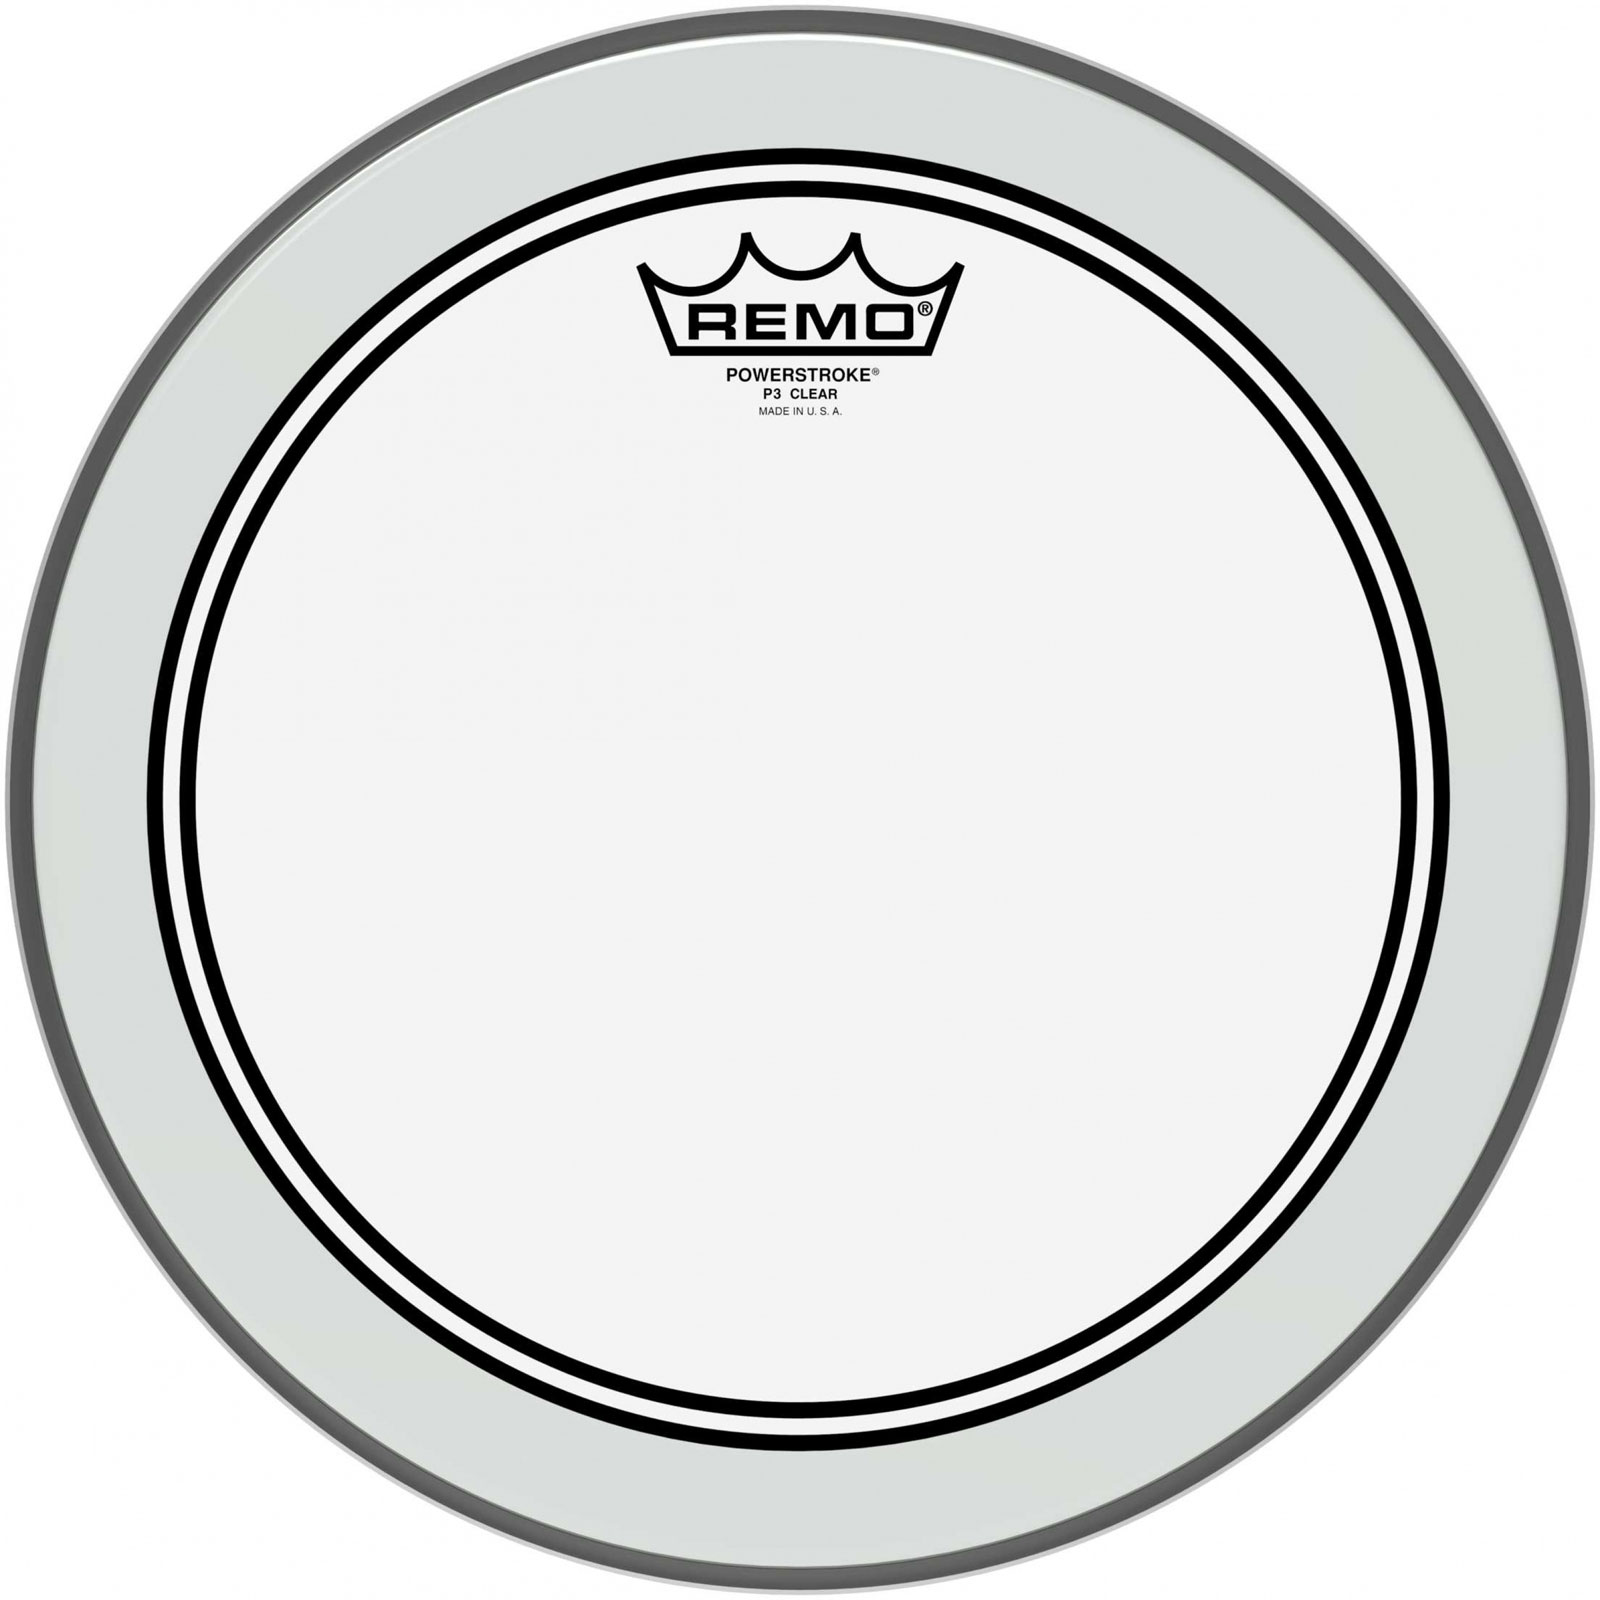 REMO POWERSTROKE 3 12 - CLEAR